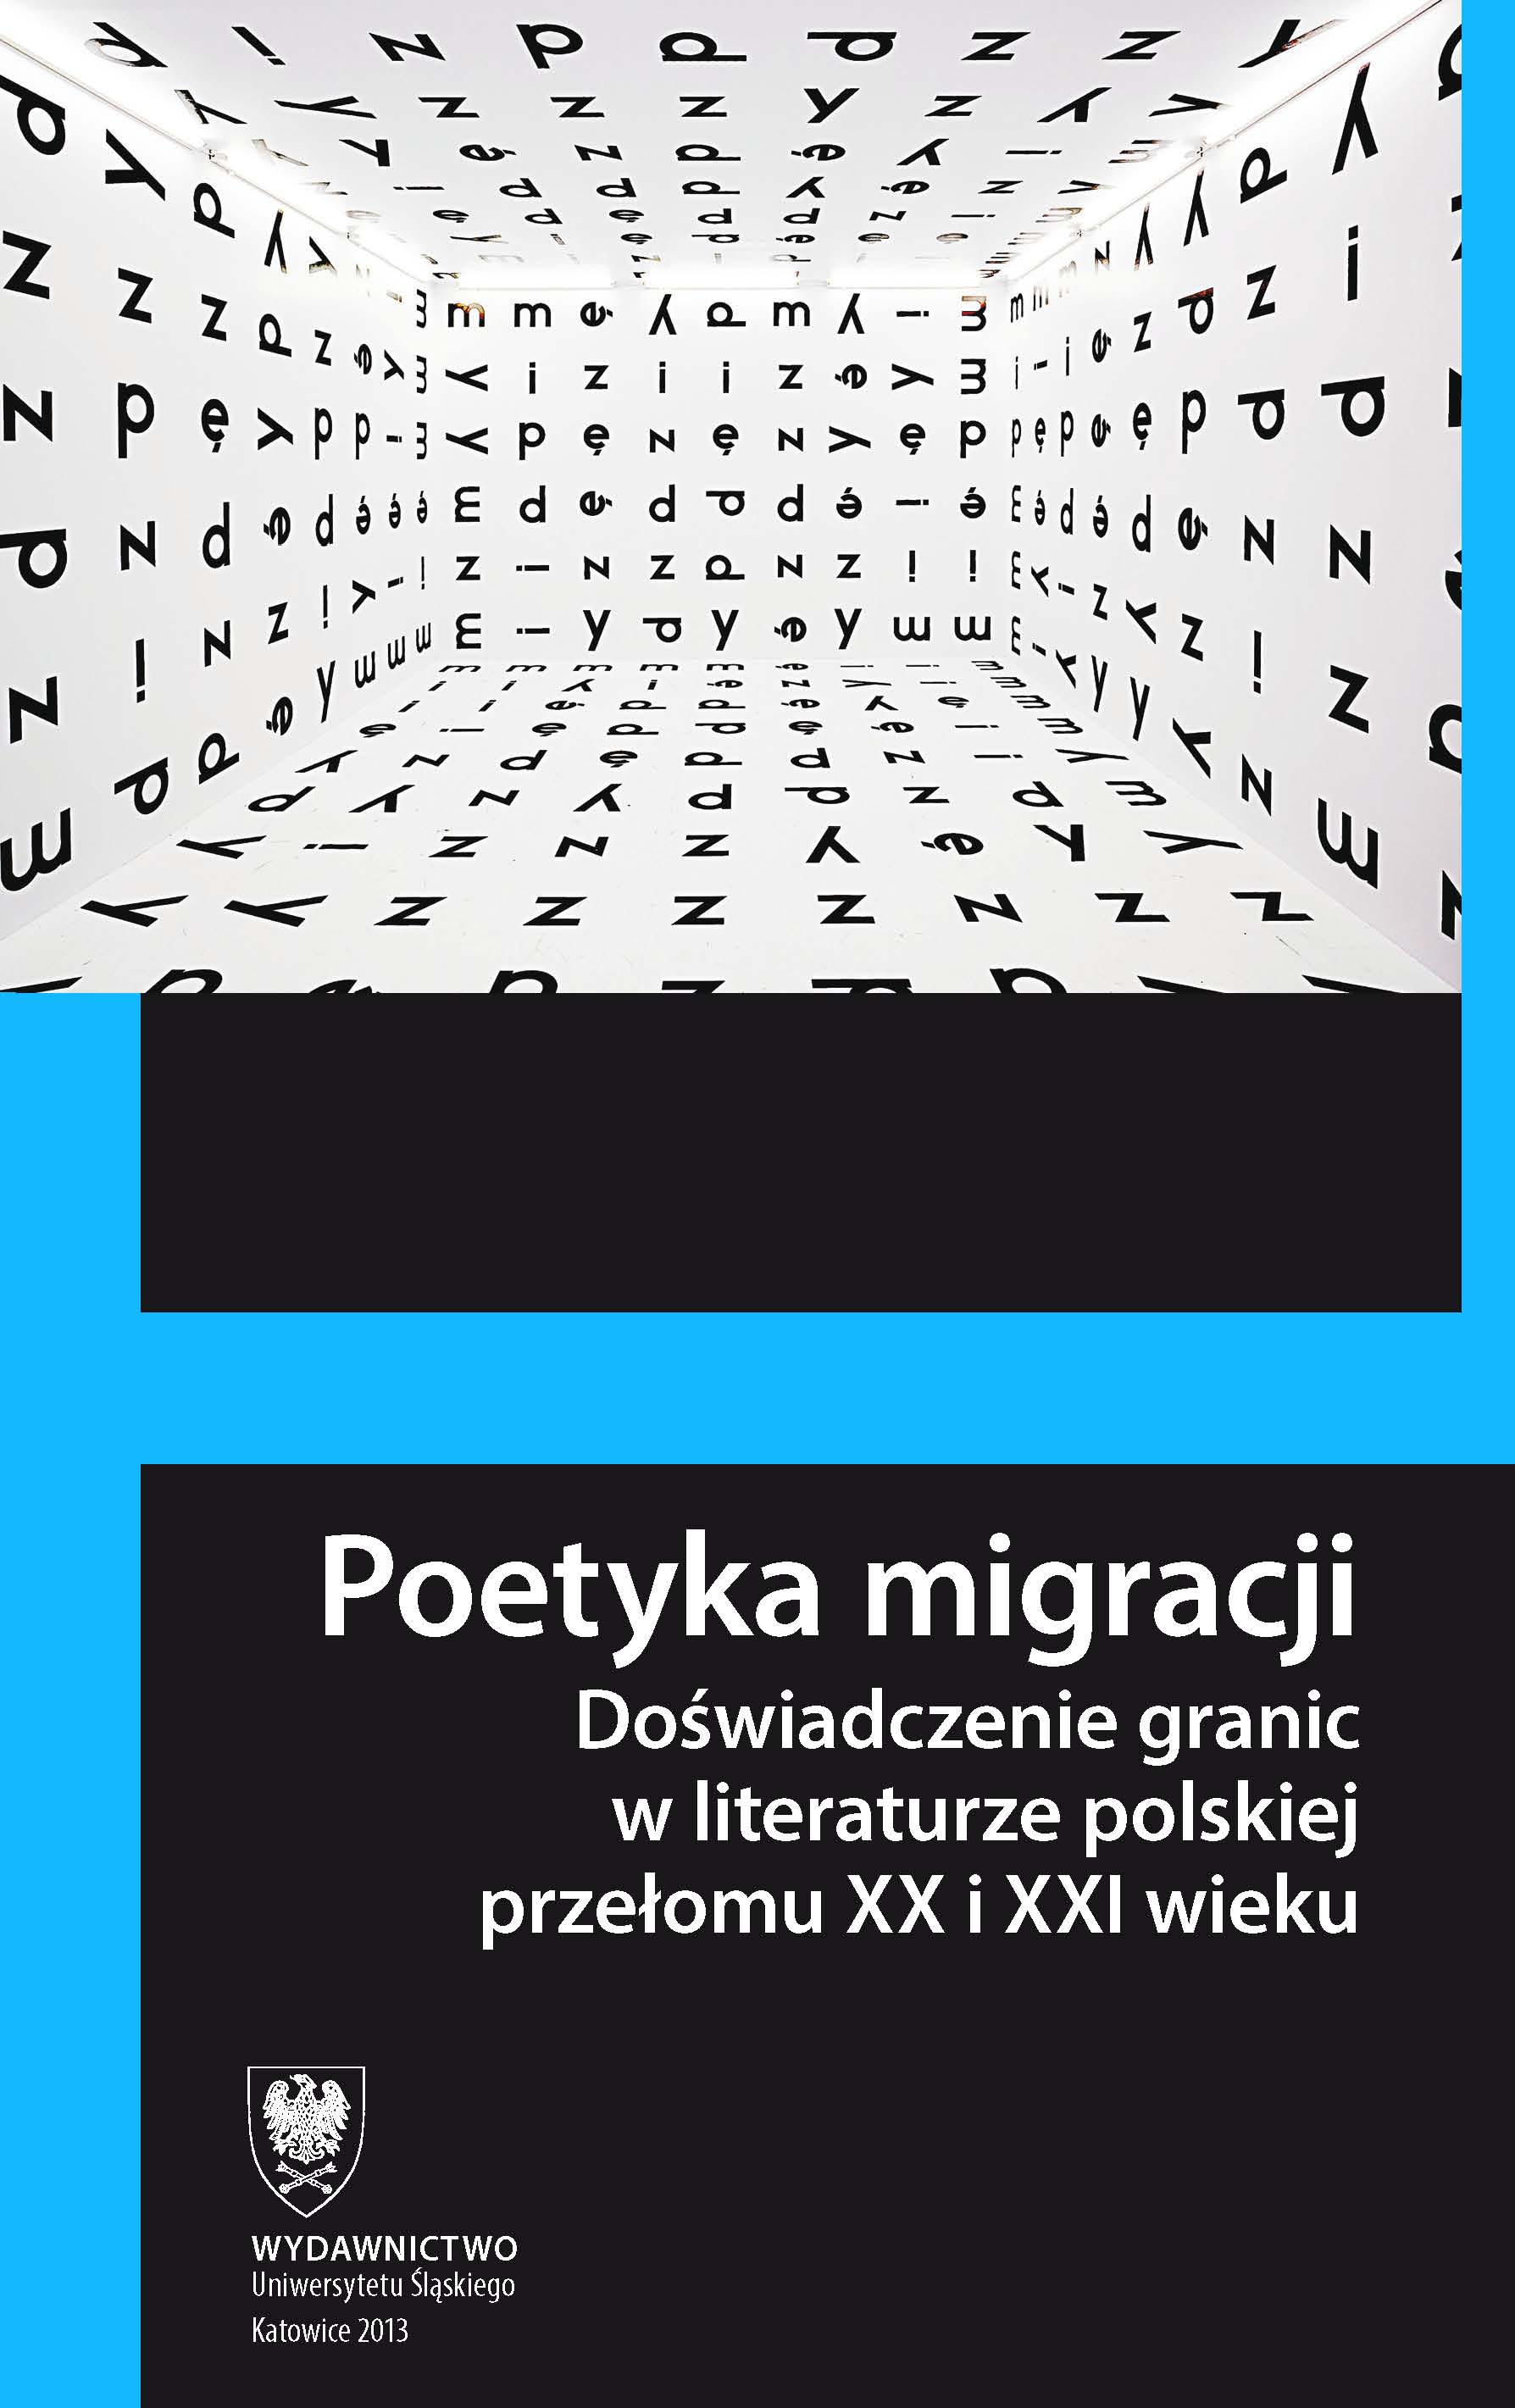 The poetics of migration. The experience of borders in Polish literature at the turn of the 20th and 21st centuries